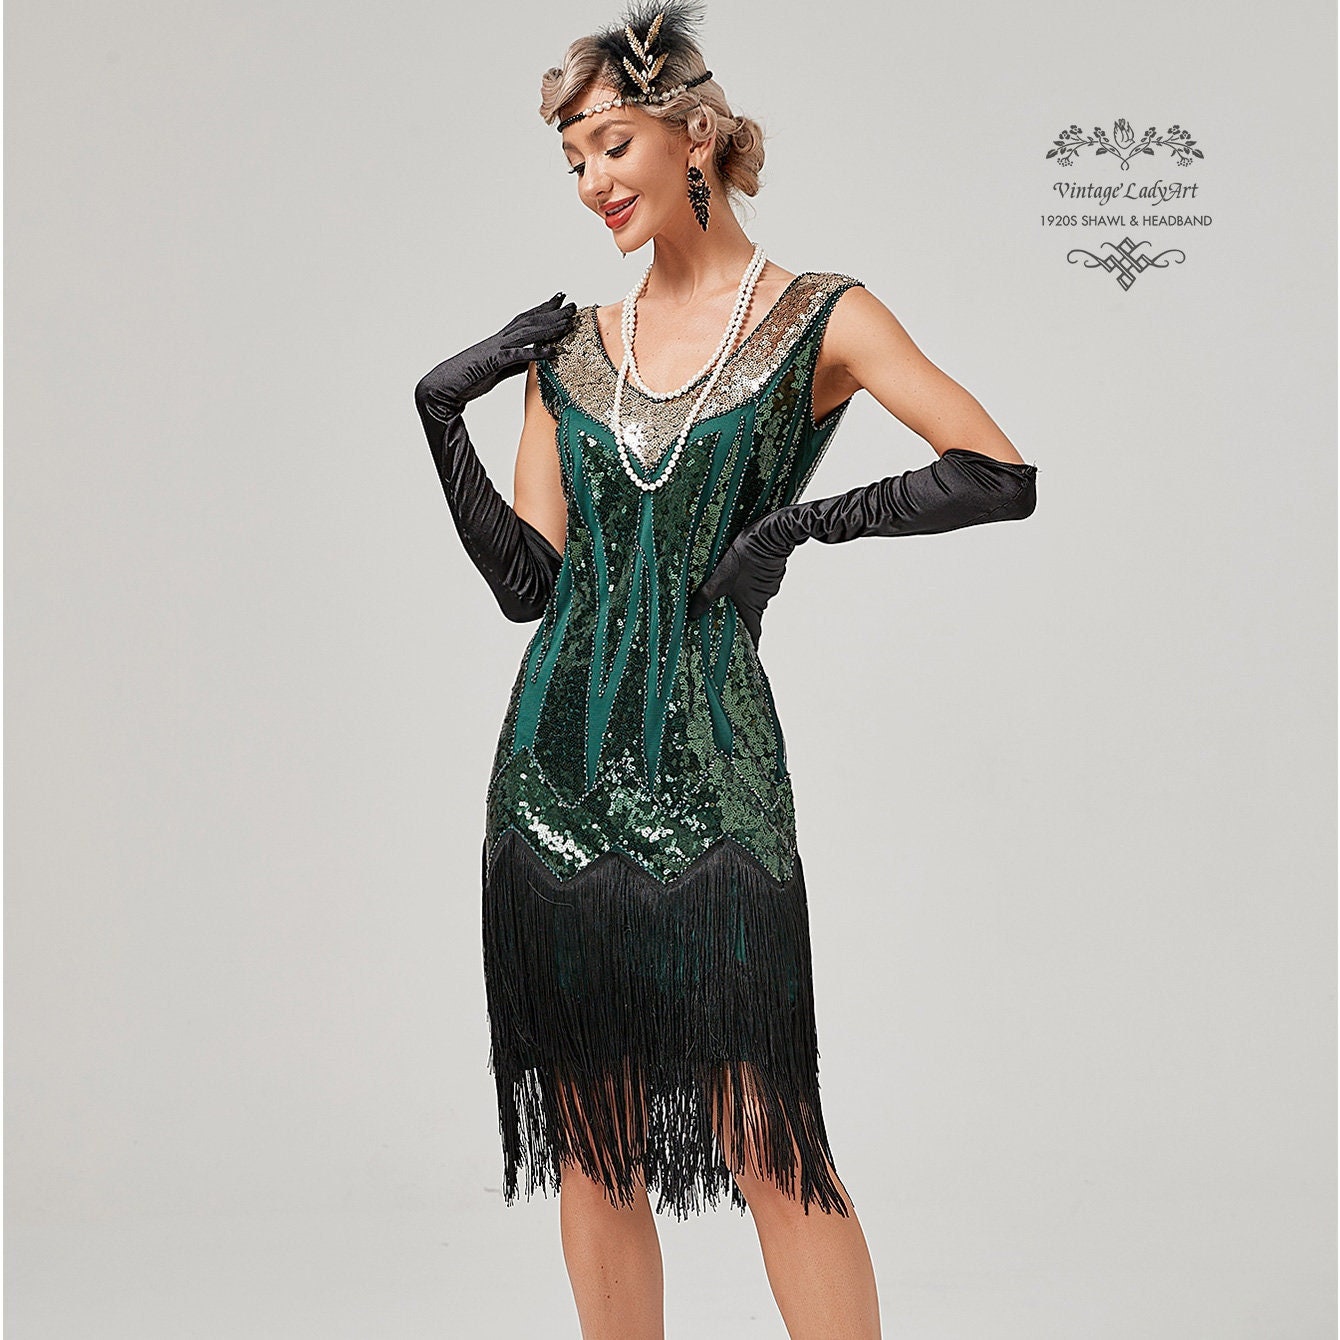 Robe Charleston - outfit Great Gatsby - Robe années 1920 - Déguisements -  Costume de